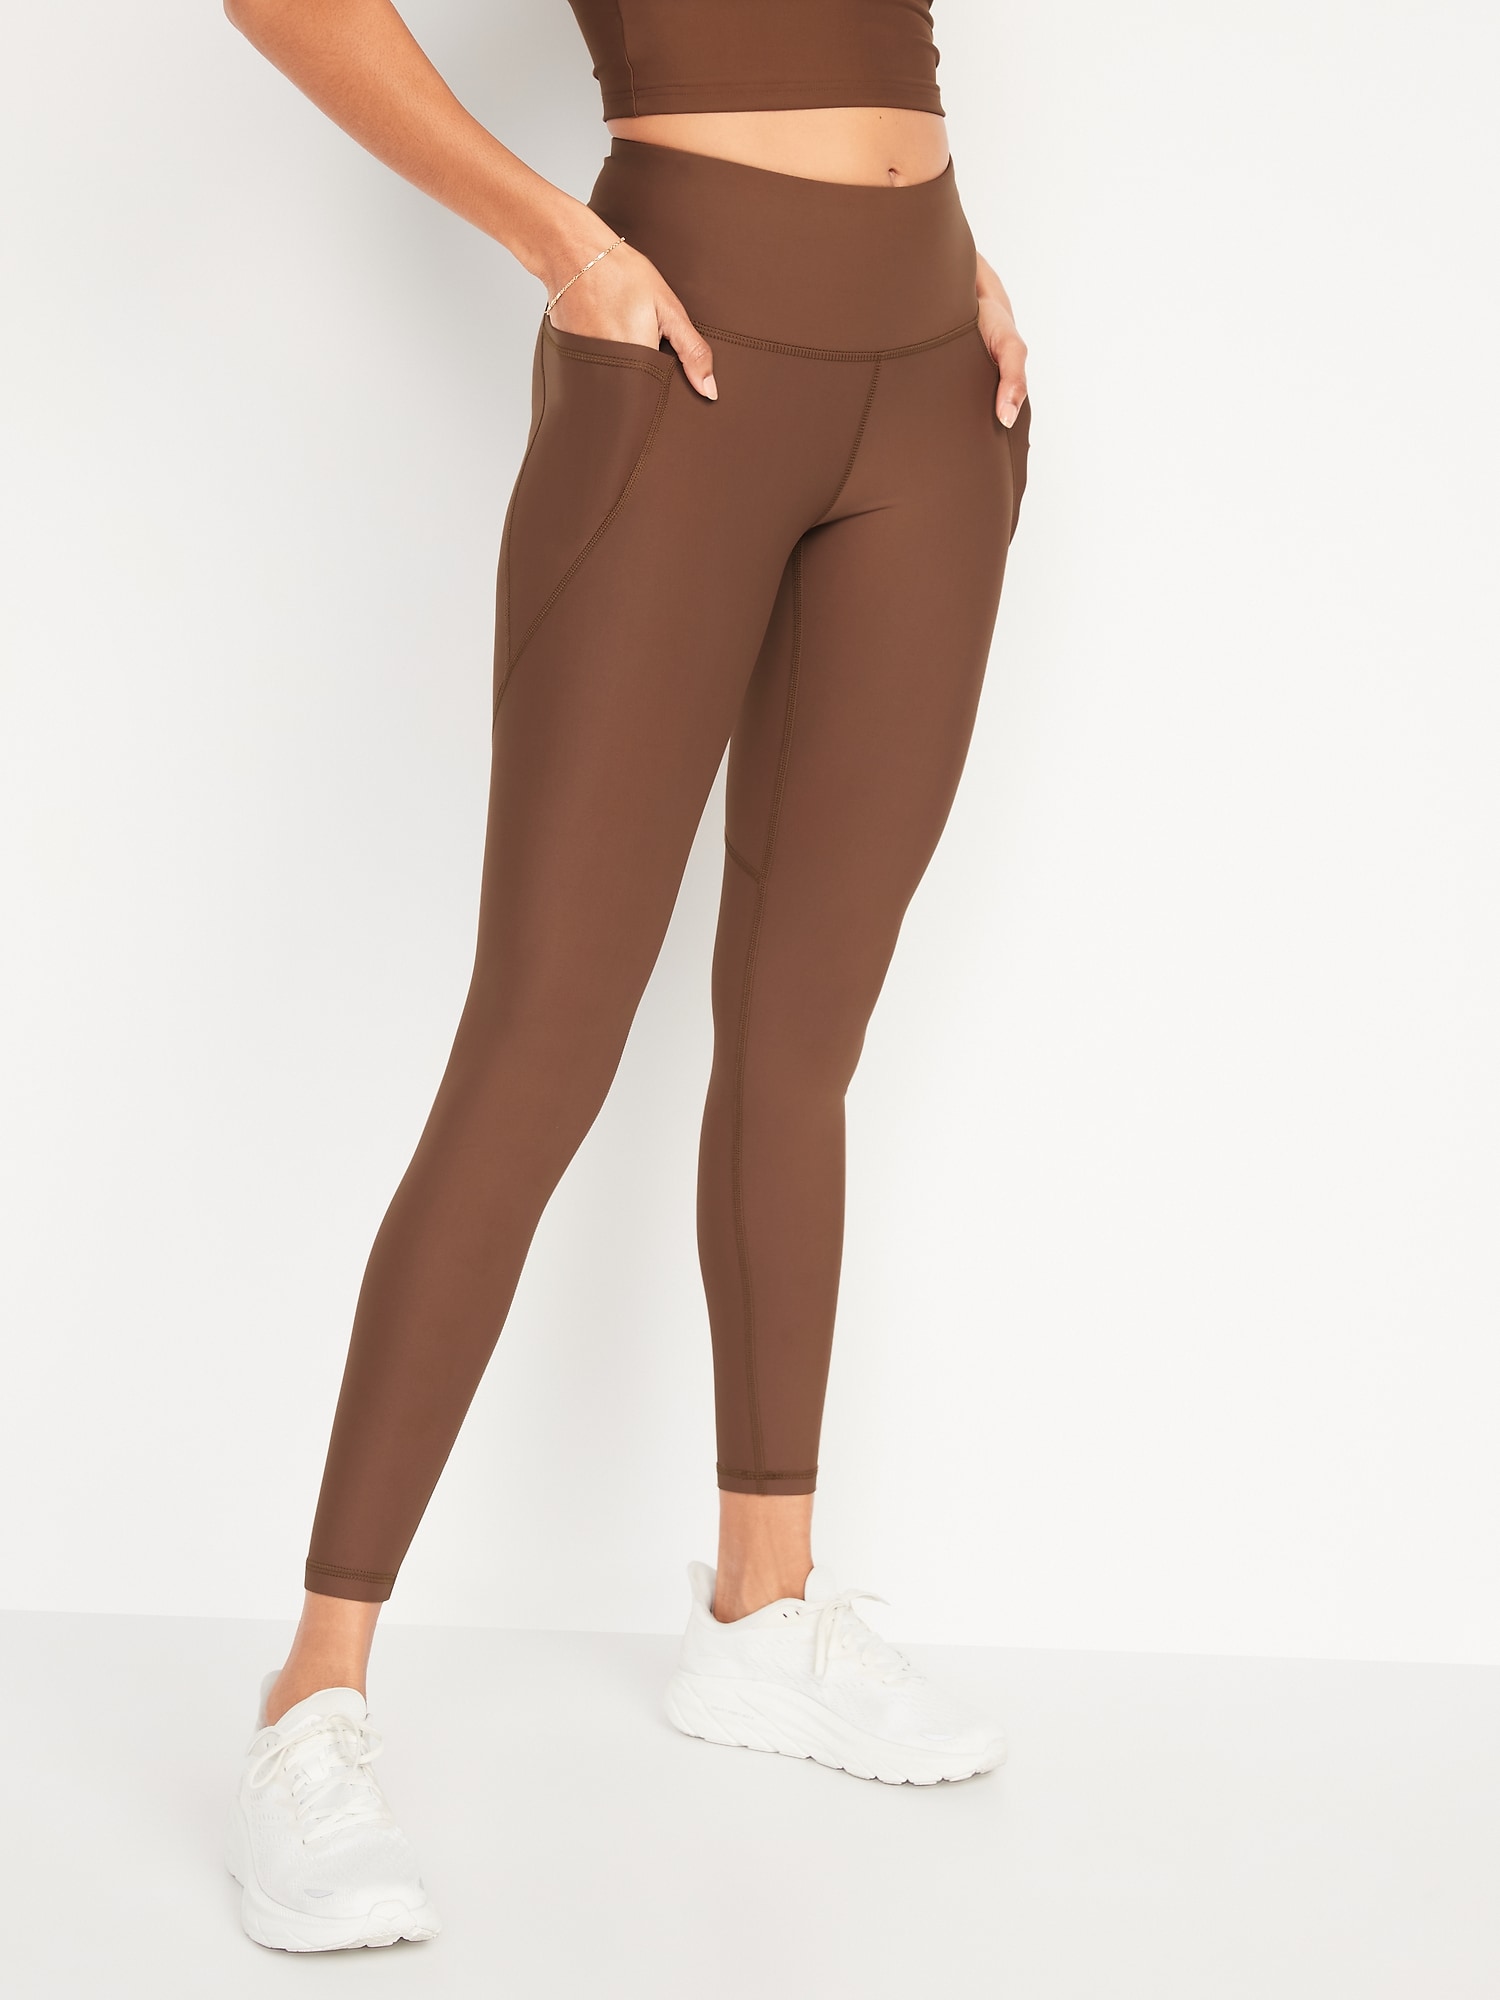 Old Navy Camouflage Athletic Leggings for Women